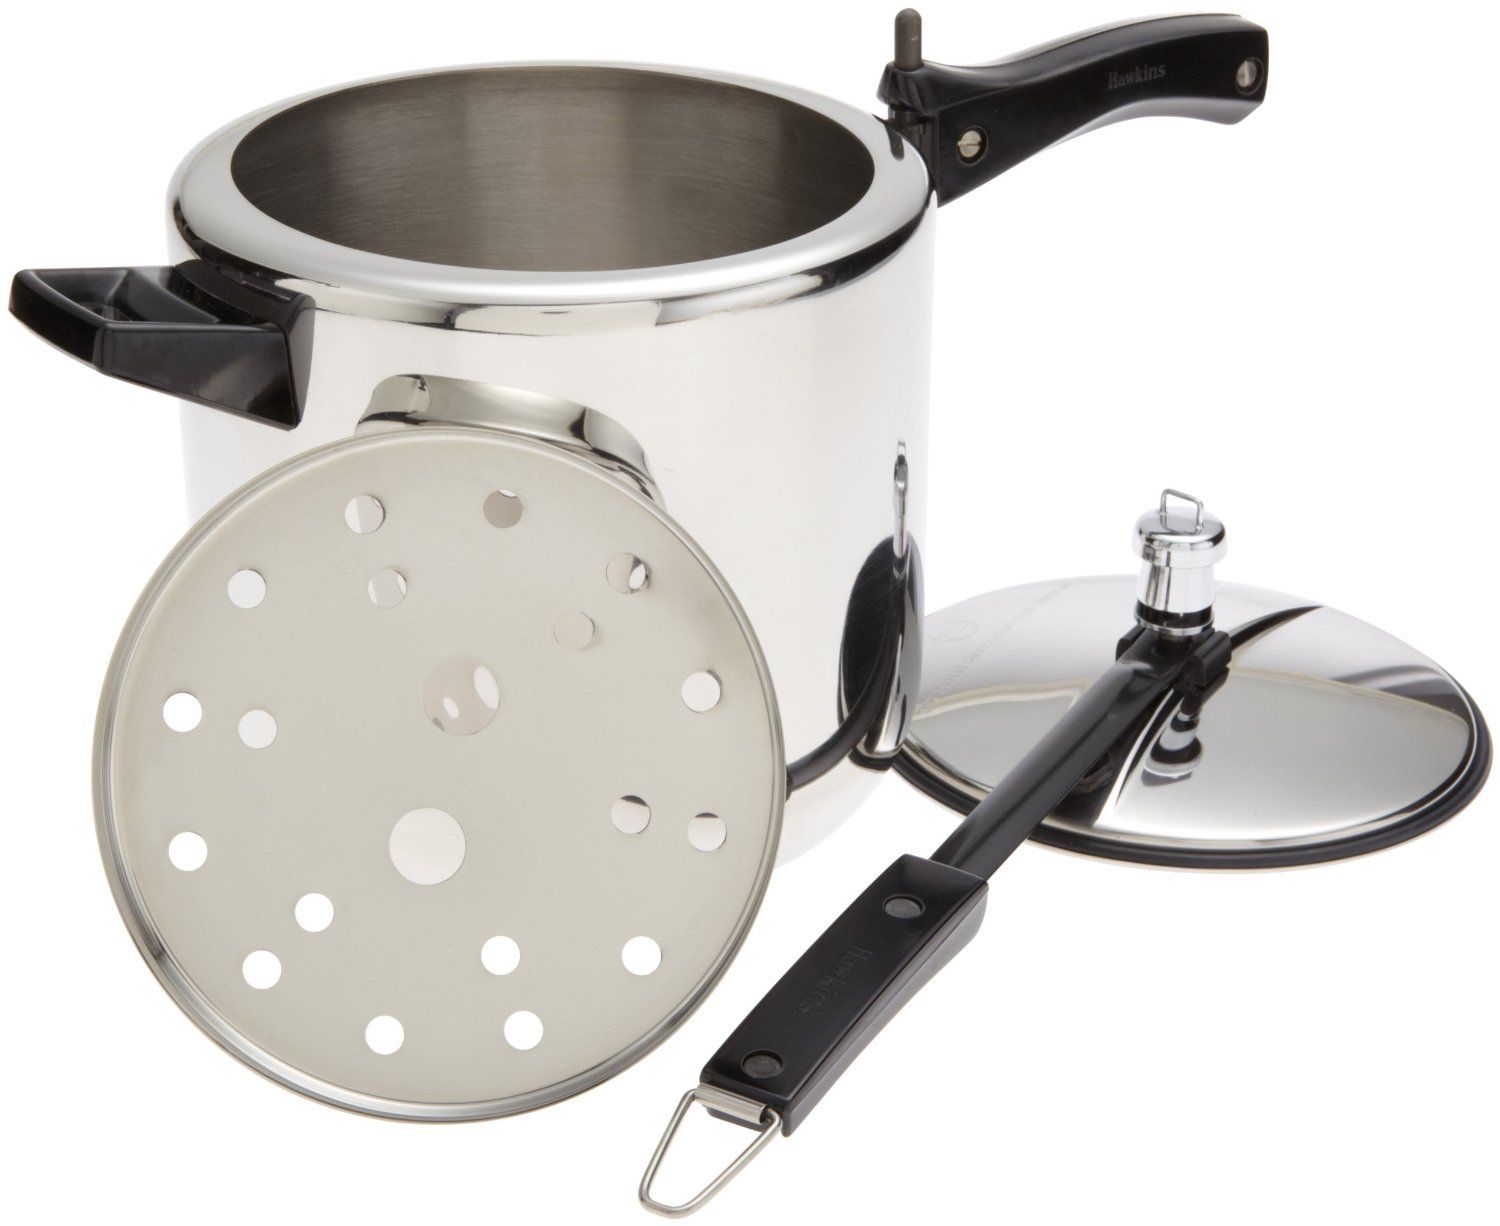 Picture of Hawkins D40 Stainless Steel Pressure Cooker - 10 Litres